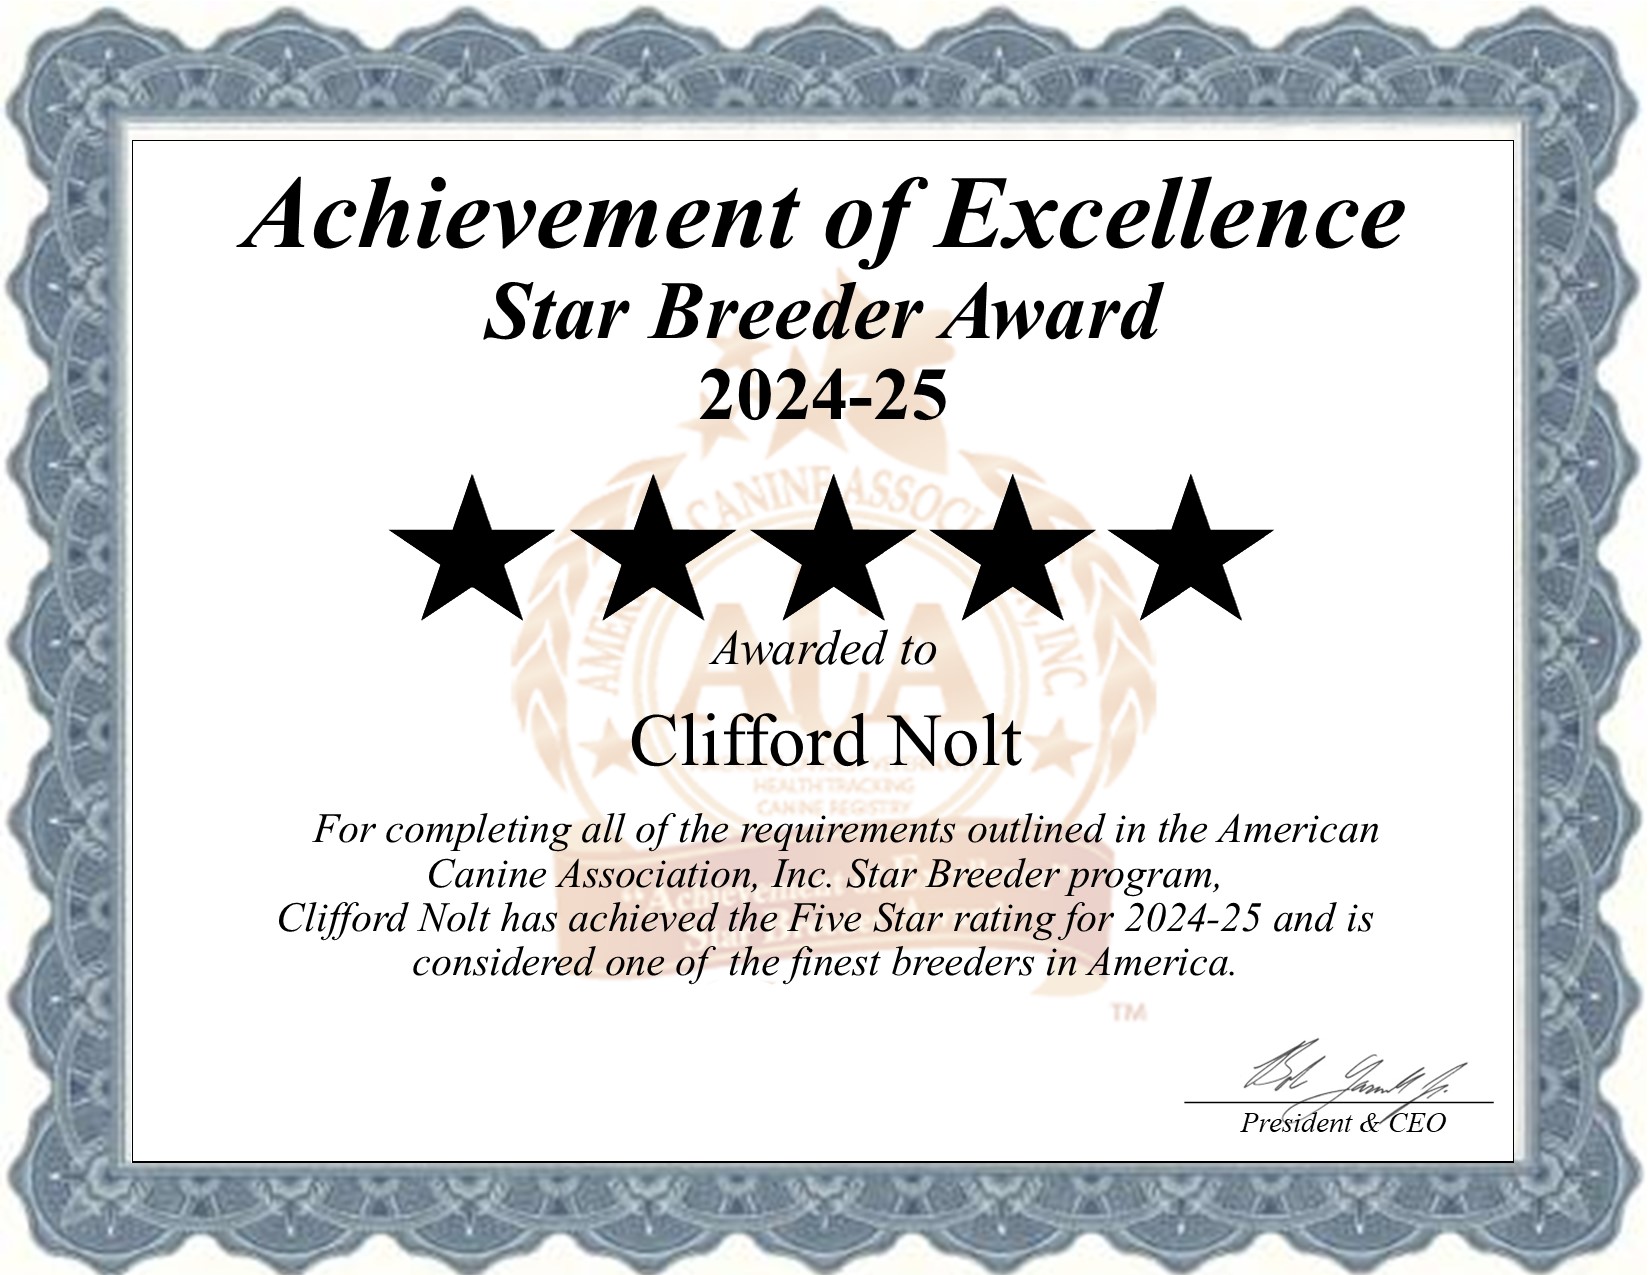 Clifford, Nolt, dog, breeder, star, certificate, Clifford-Nolt, East Earl, PA, Pennsylvania, puppy, dog, kennels, mill, puppymill, usda, 5-star, aca, ica, registered, Chihuahua, none